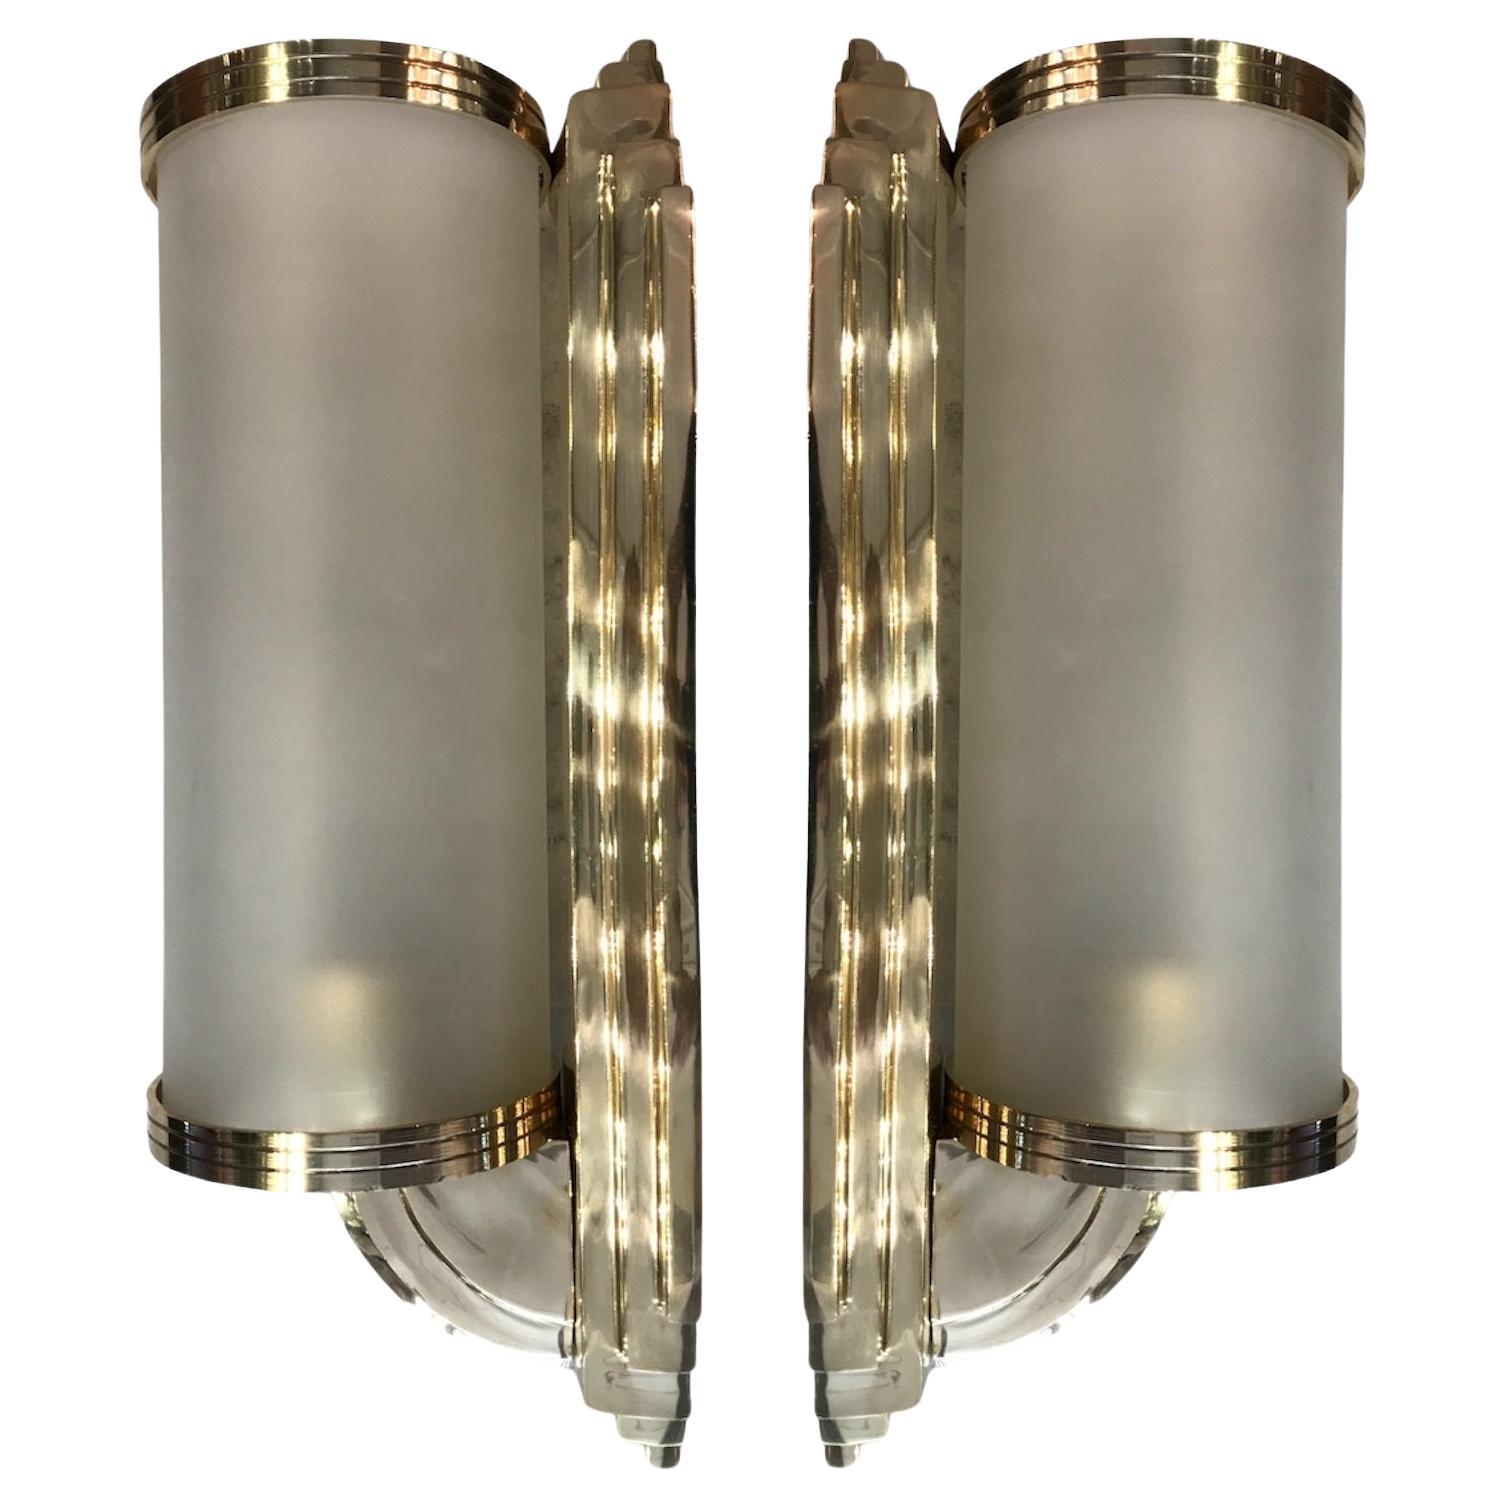 2 French Sconces in Bronze and Glass, Style: Art Deco, Year: 1930, German